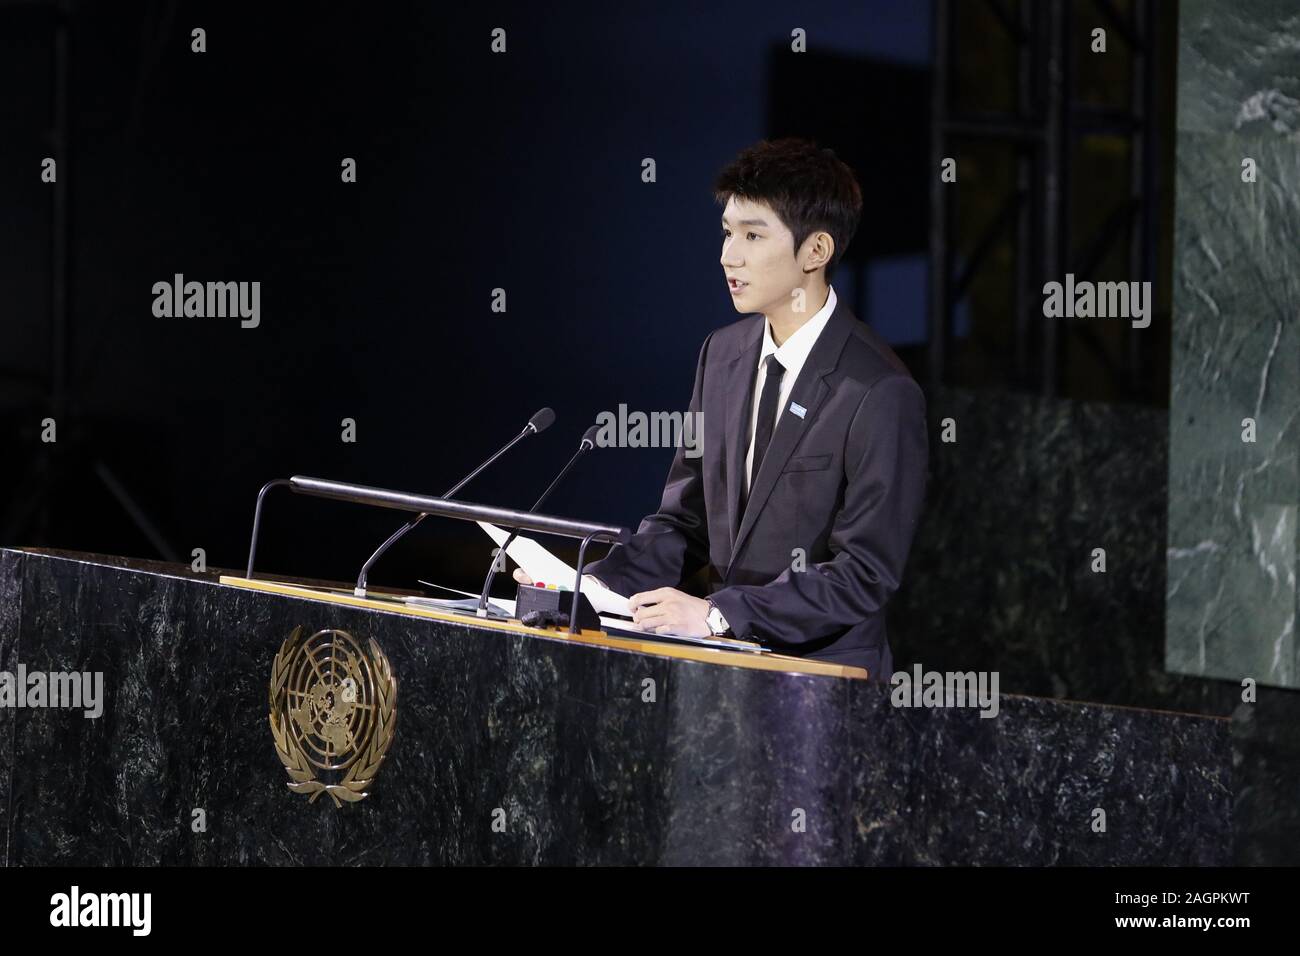 (191220) -- NEW YORK, Dec. 20, 2019 (Xinhua) -- United Nations Children's Fund (UNICEF) Goodwill Ambassador Wang Yuan addresses a high-level meeting on the occasion of the 30th anniversary of the adoption of the Convention on the Rights of the Child (CRC), at the UN headquarters in New York, on Nov. 20, 2019. Unilateralism and protectionism have been eroding the global governance system throughout 2019, prompting widespread concern among members of the international community. Braving such headwinds, China has been doing its utmost to defend multilateralism, via concrete actions such as paying Stock Photo